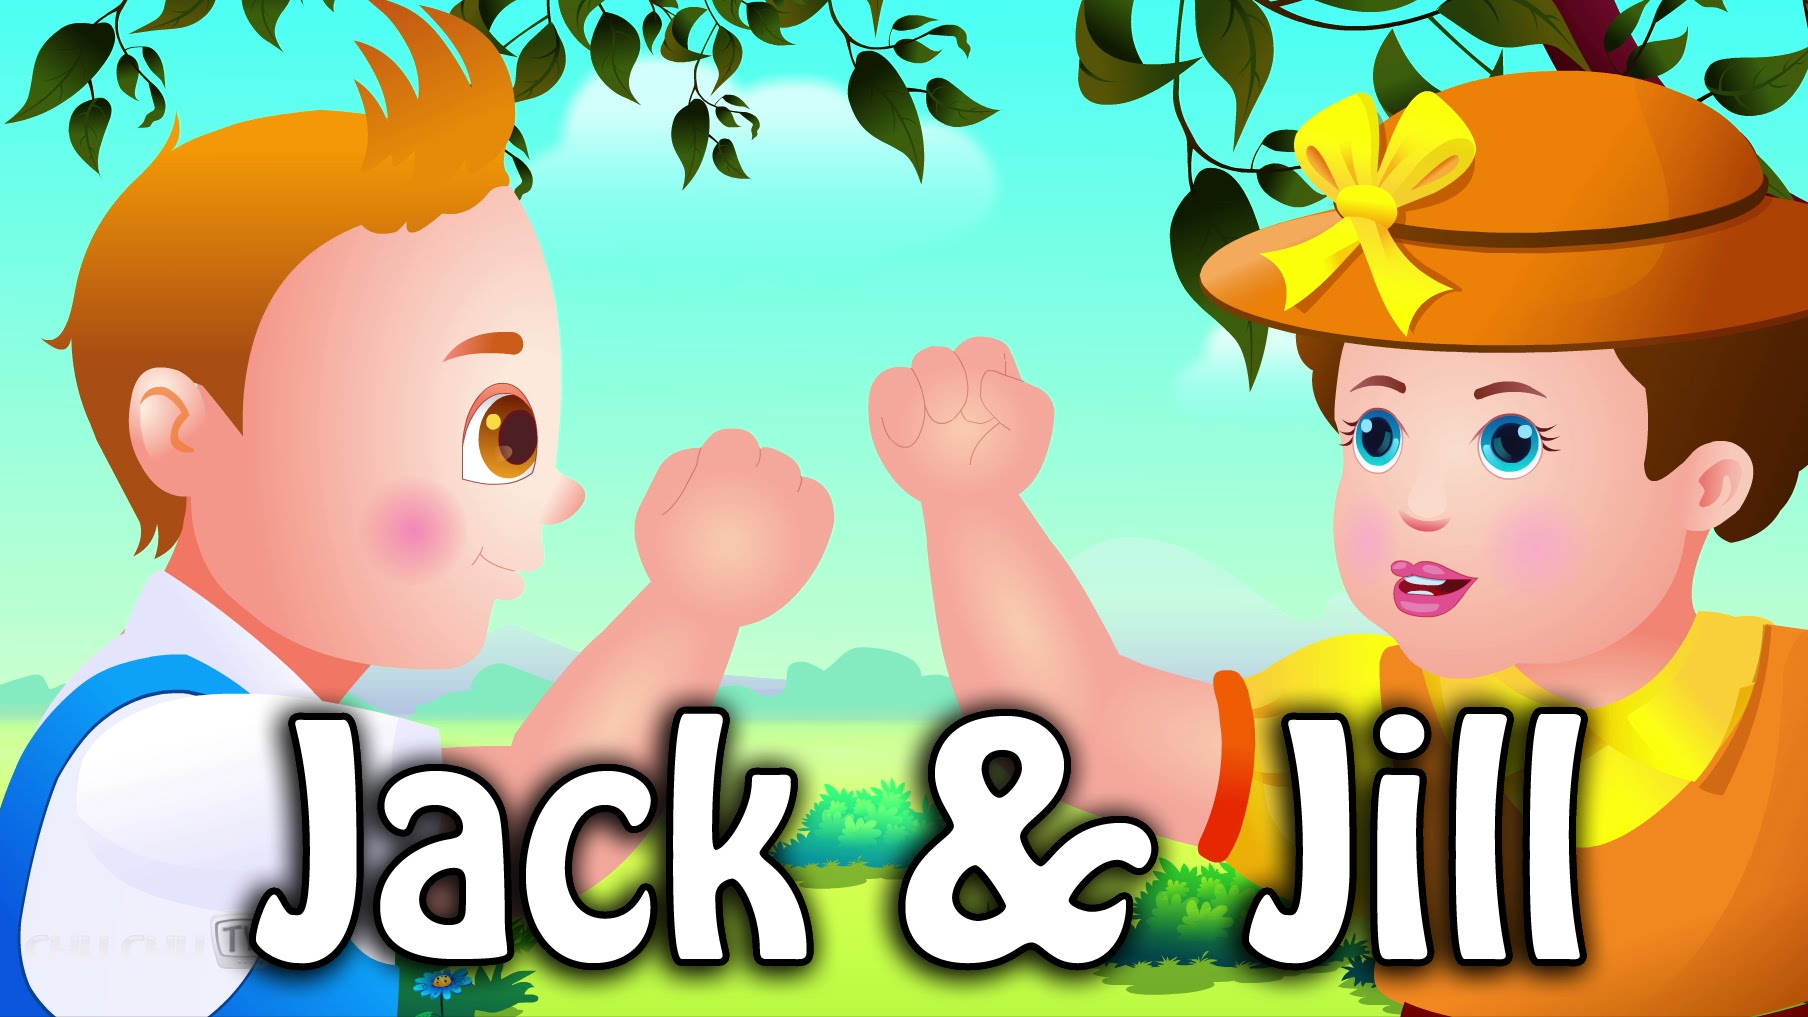 Jack And Jill Backgrounds, Compatible - PC, Mobile, Gadgets| 1808x1017 px